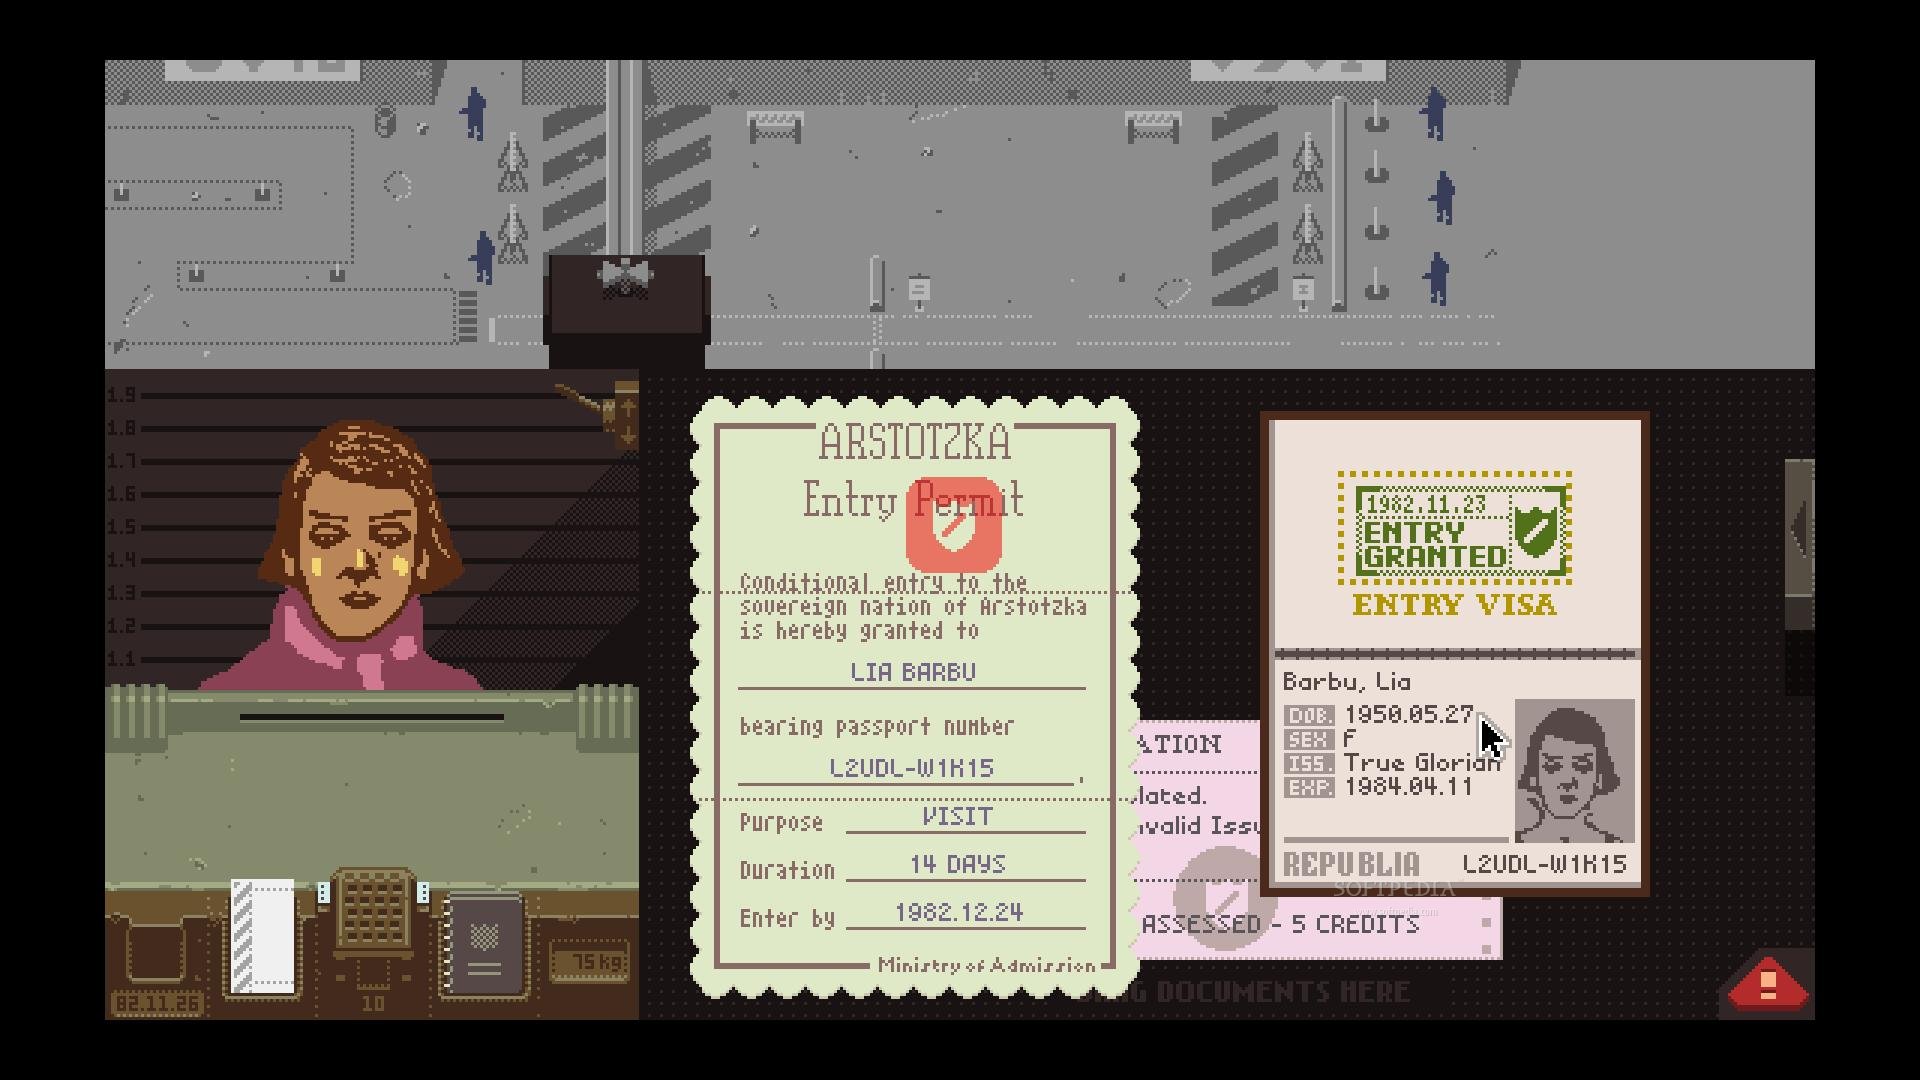 That s not my neighbor papers please. Обложка Арстотцка. Papers please обложка.